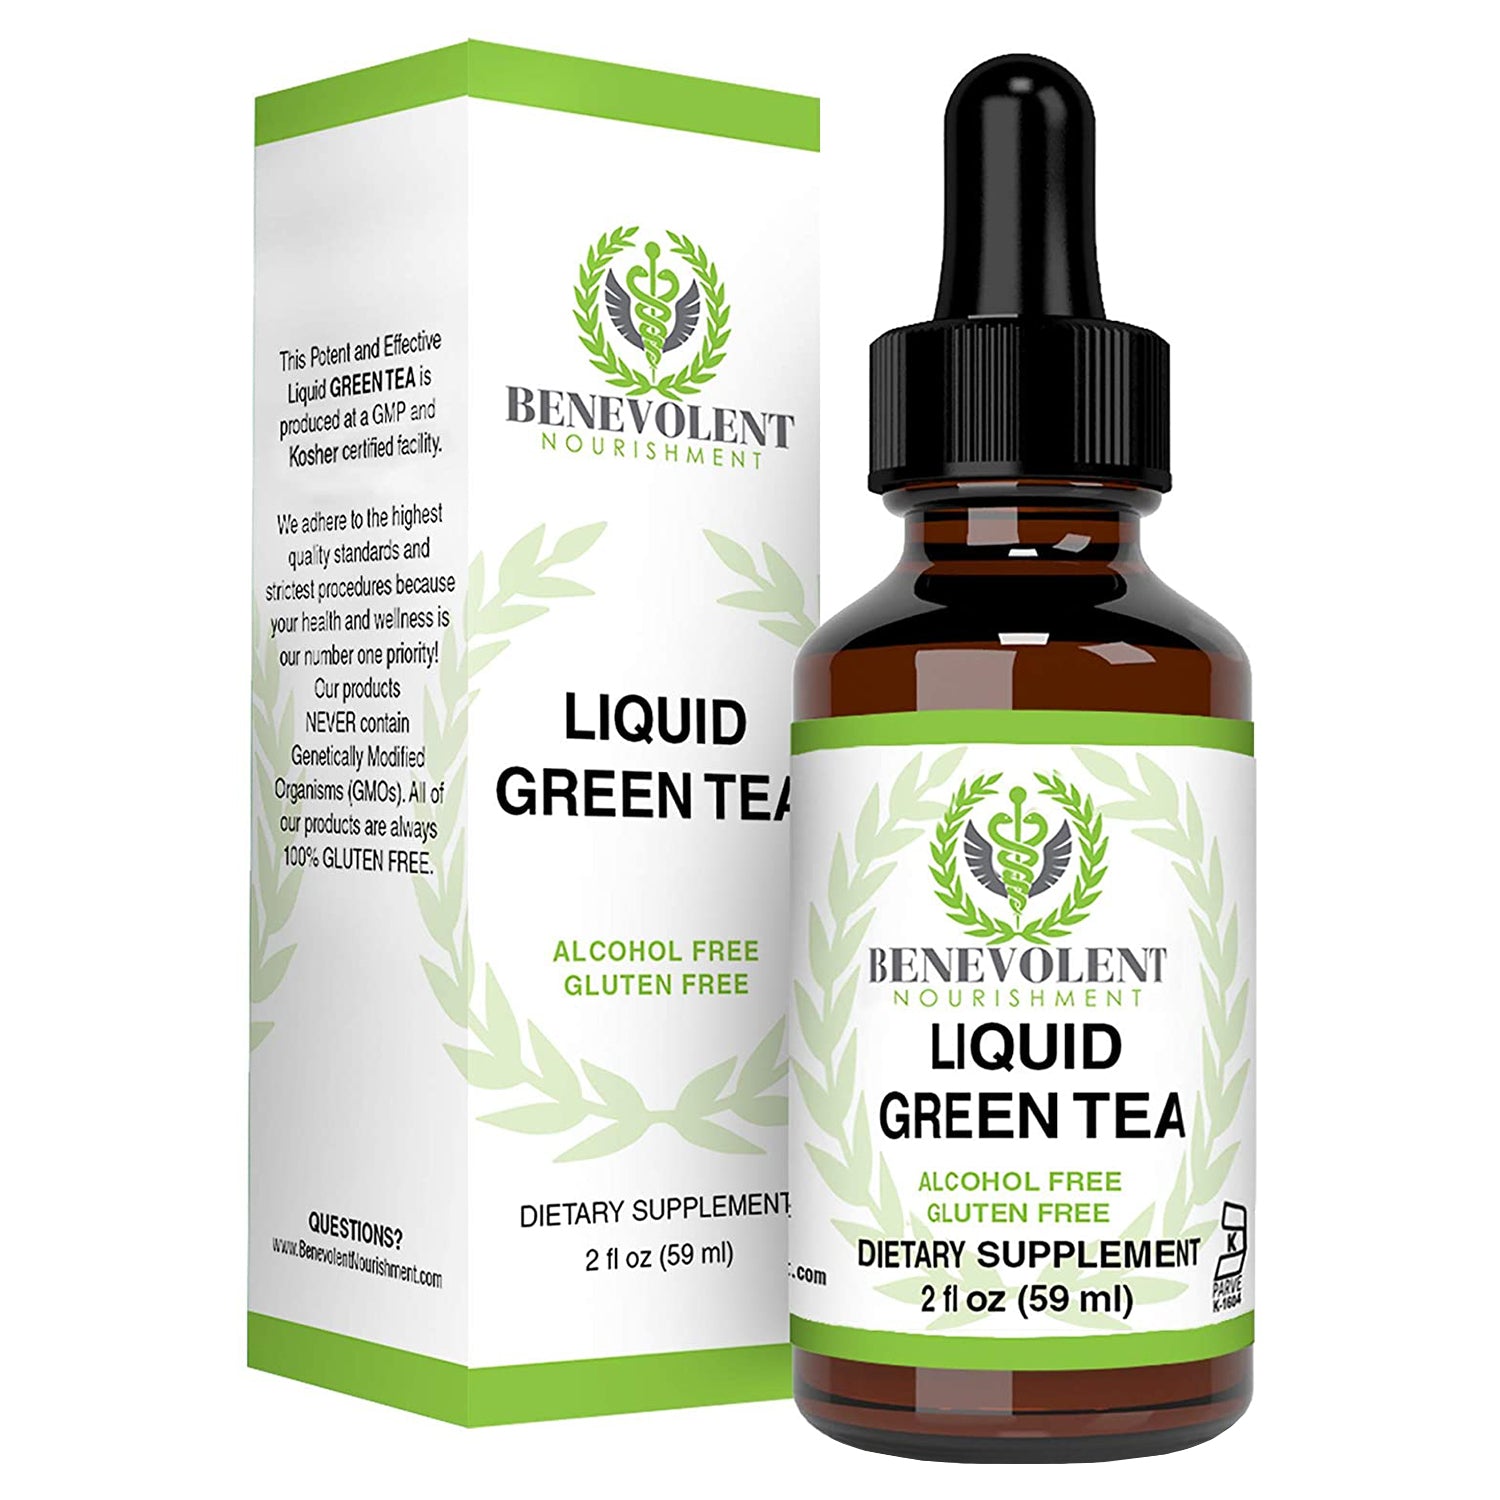 Green Tea Fat Burner - with EGCG Green Tea Extract Liquid, Max Potency for Weight Loss Support & Energy, 10 Cups of Green Tea Natural Antioxidants